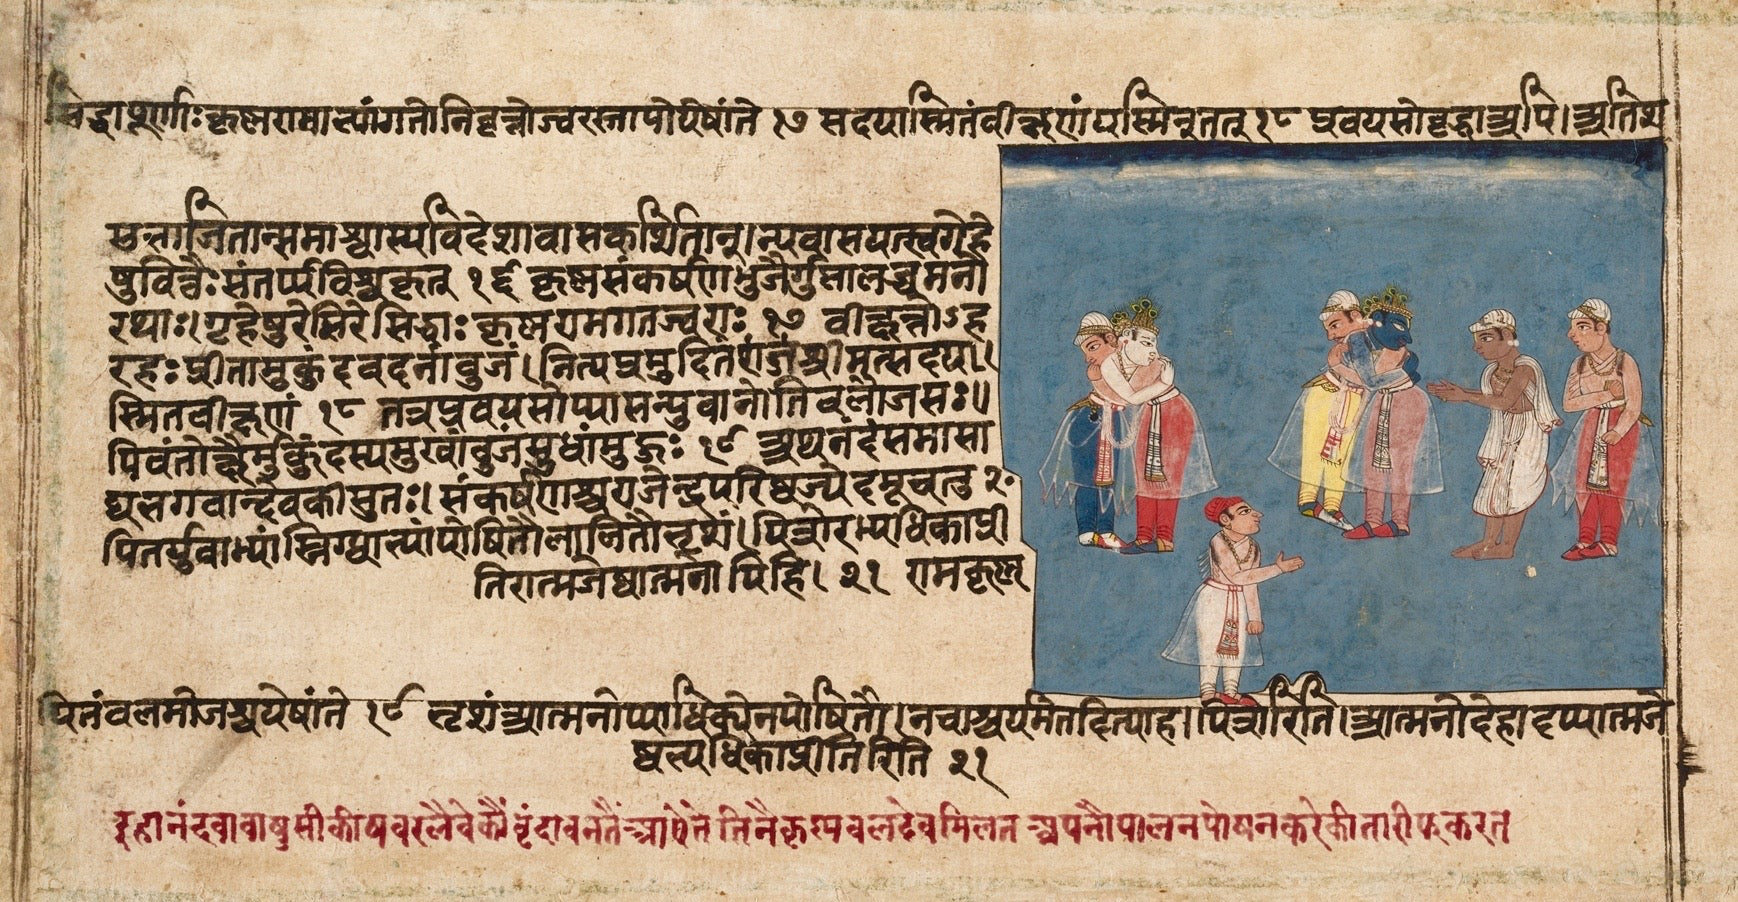 Discovering the Symbolism and Allegories in Puranic Stories